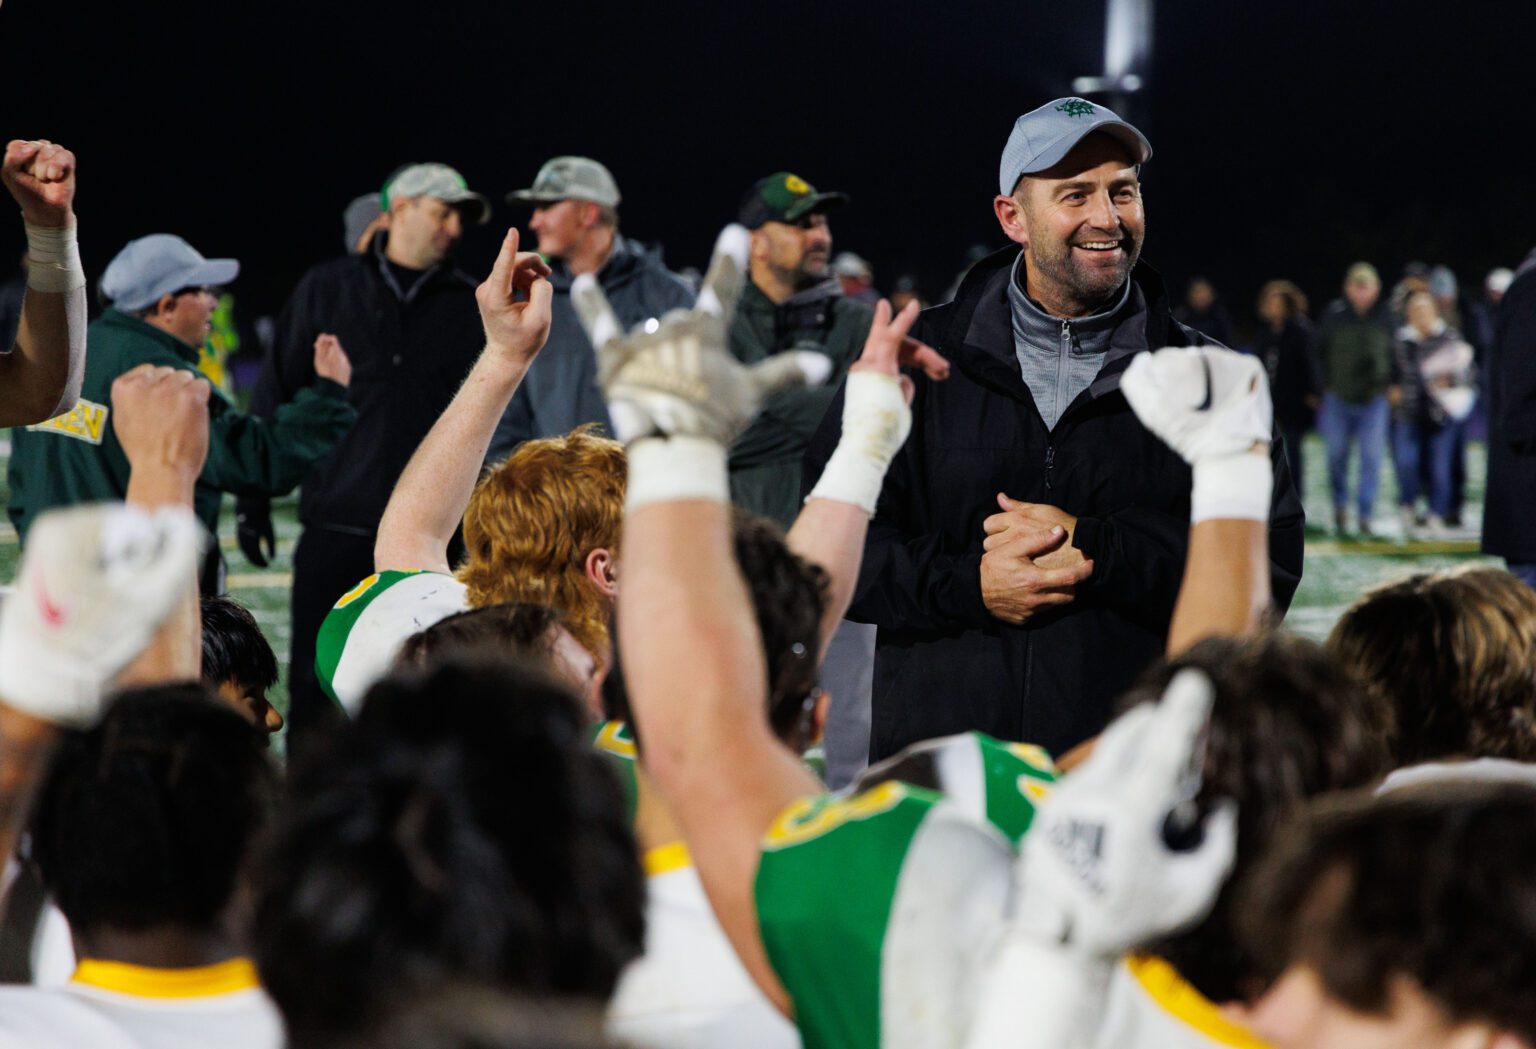 Lynden players cheer with their hands in the air for head coach Blake VanDalen as he smiles at his team.